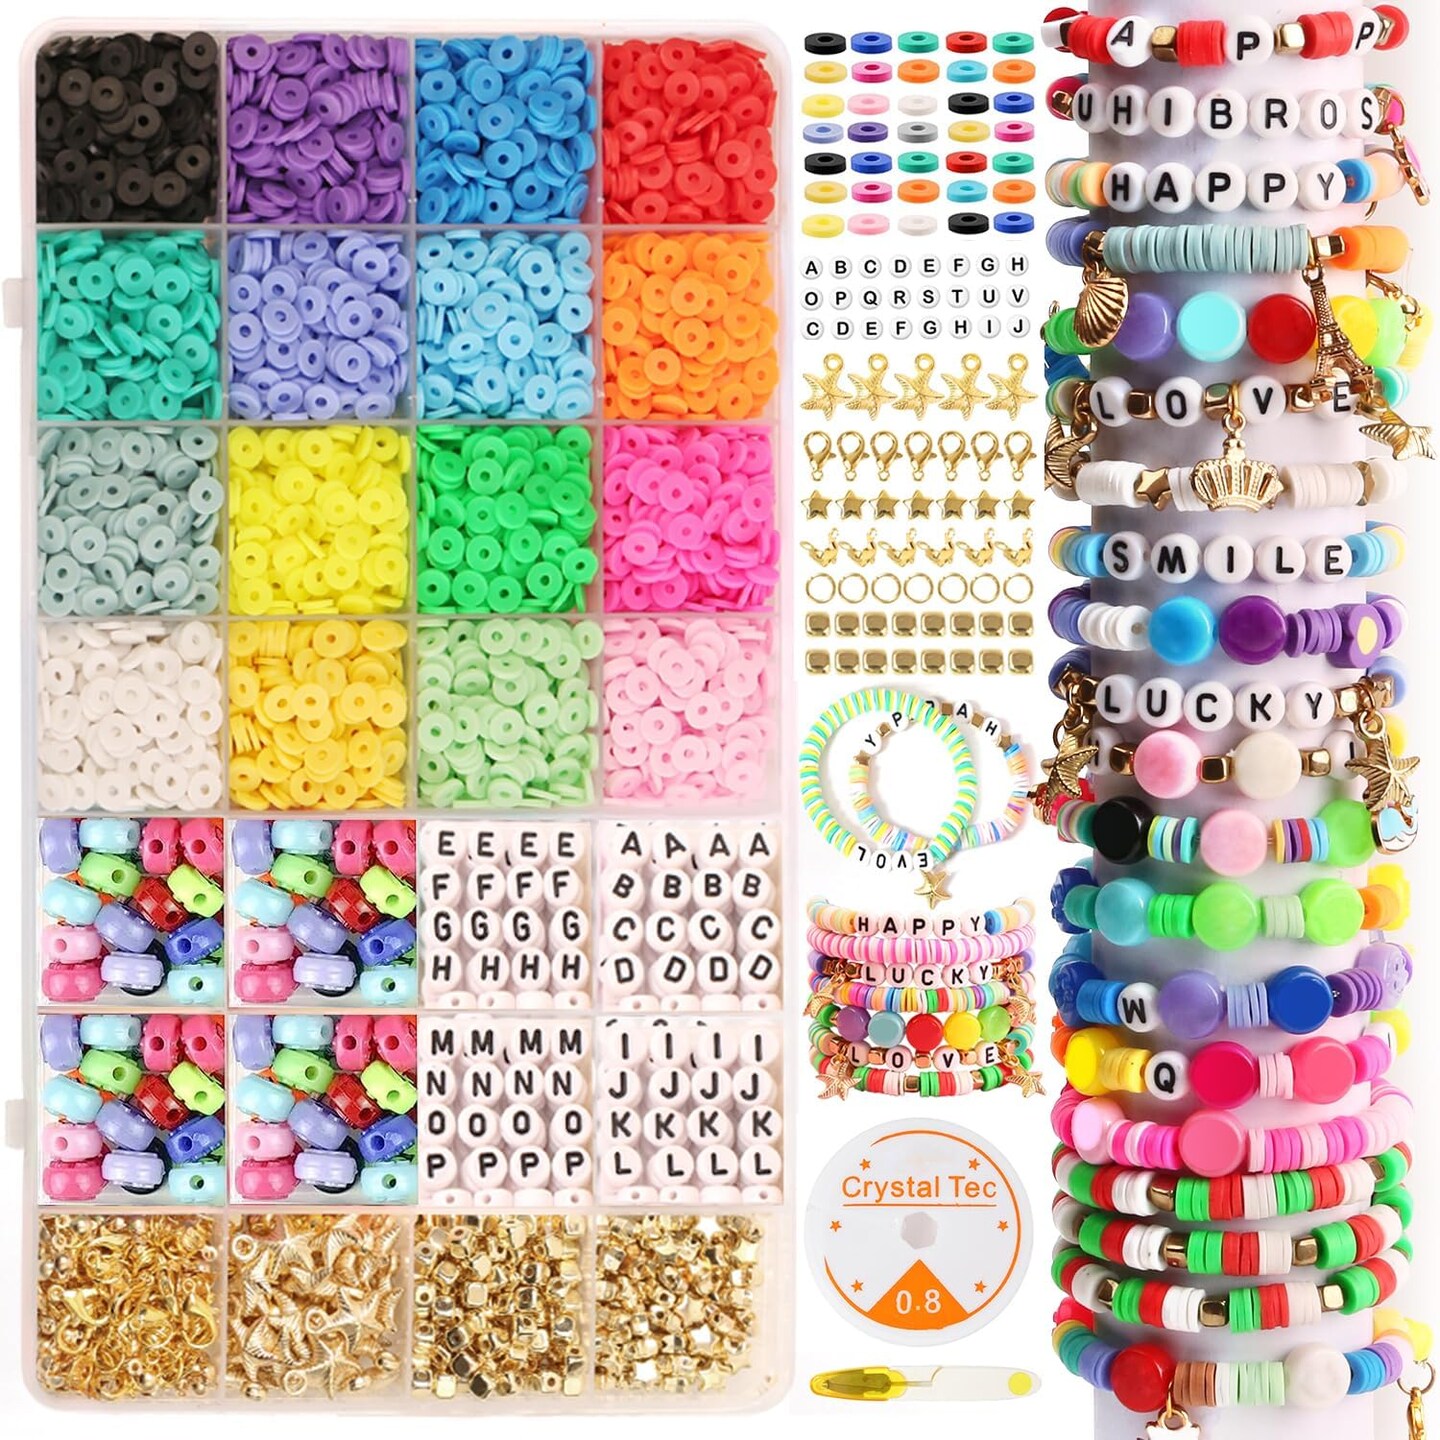 6000 Pcs Clay Beads Bracelet Making Kit, Girls Friendship Bracelet Polymer Heishi Beads with Jewelry Charms Crafts Gifts for Teen